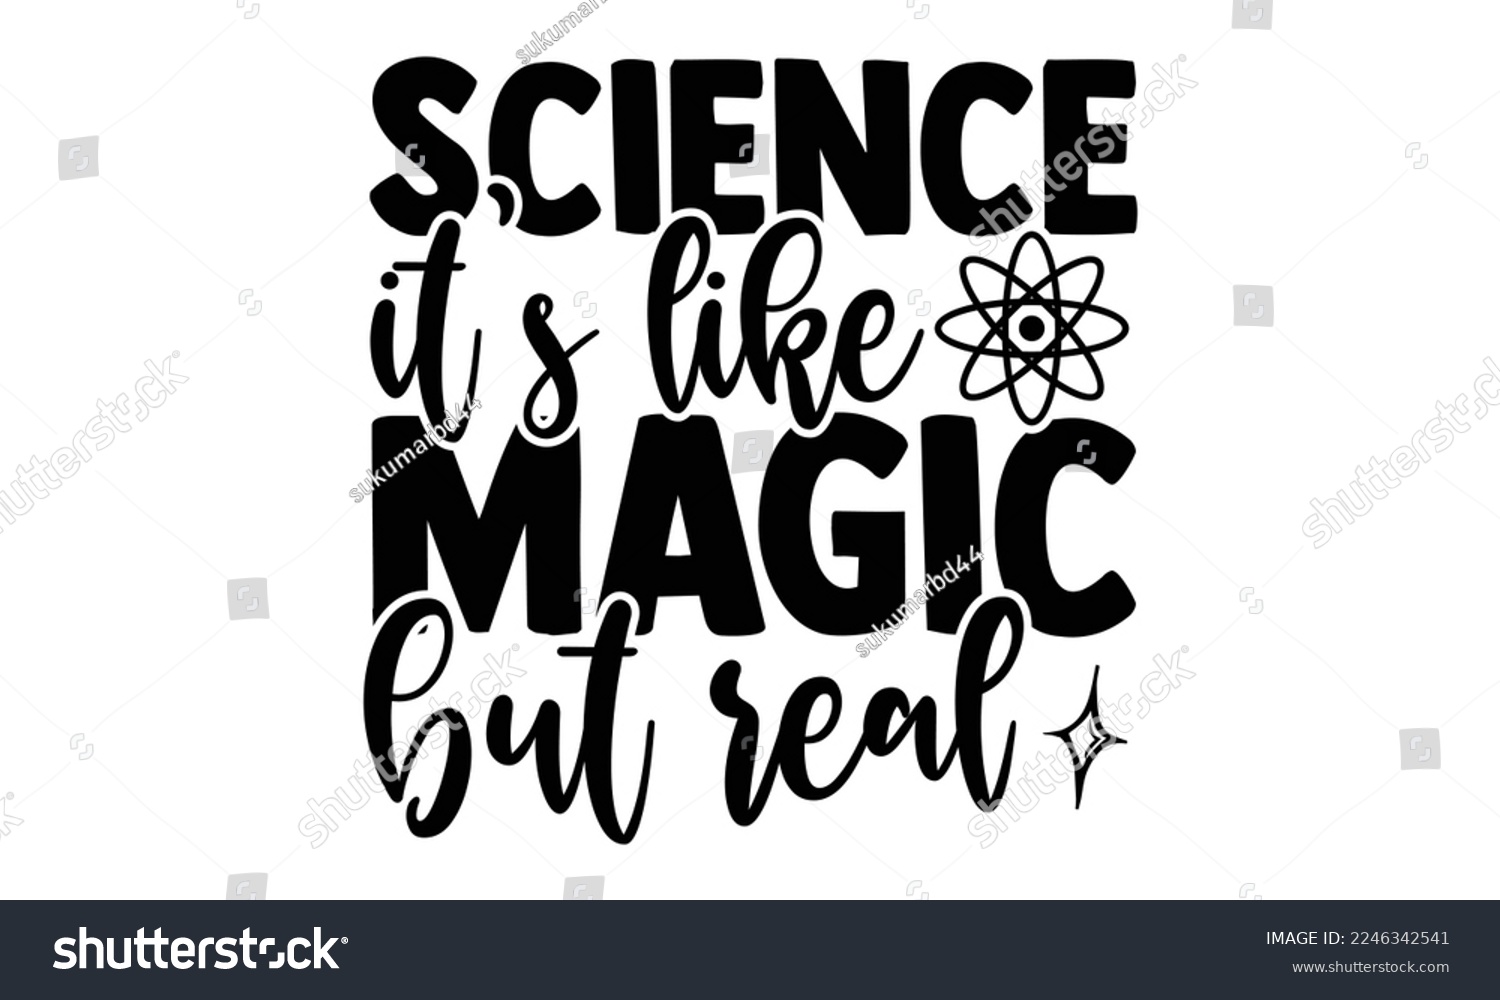 SVG of Science It’s Like Magic But Real - Scientist t shirt design, Hand drawn lettering phrase isolated on white background, Calligraphy quotes design, SVG Files for Cutting, bag, cups, card svg